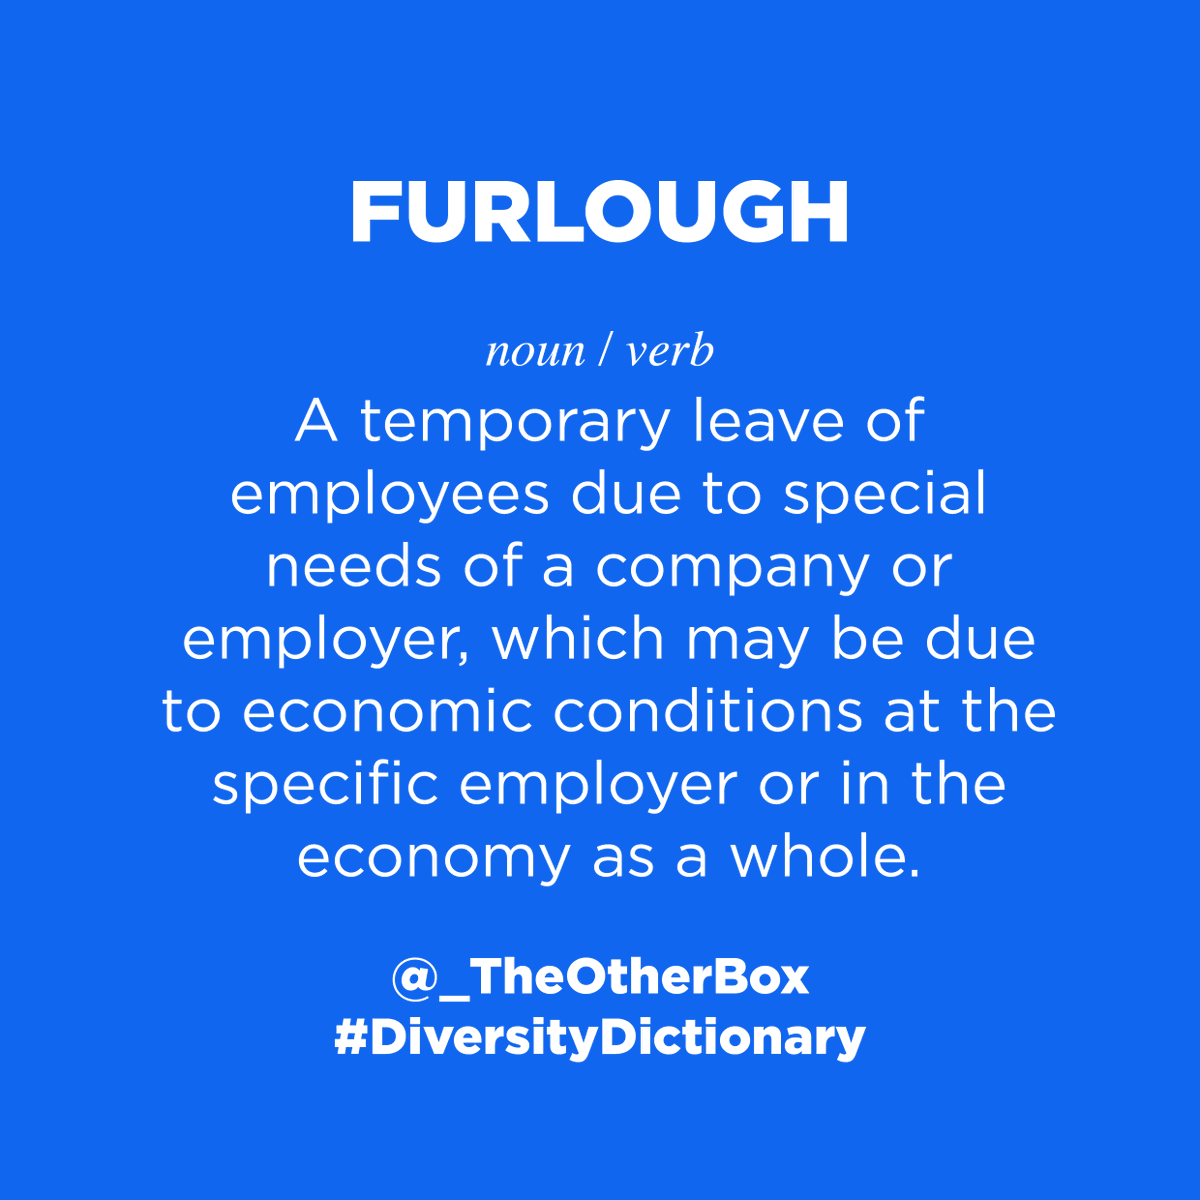 We're continuing our  #DiversityDictionary series with coronavirus-specific terms. There's so much new lexicon entering our everyday language, that it can be hard to keep track. Prior to the pandemic, many people may never have heard of the word 'furlough'. (1/5)